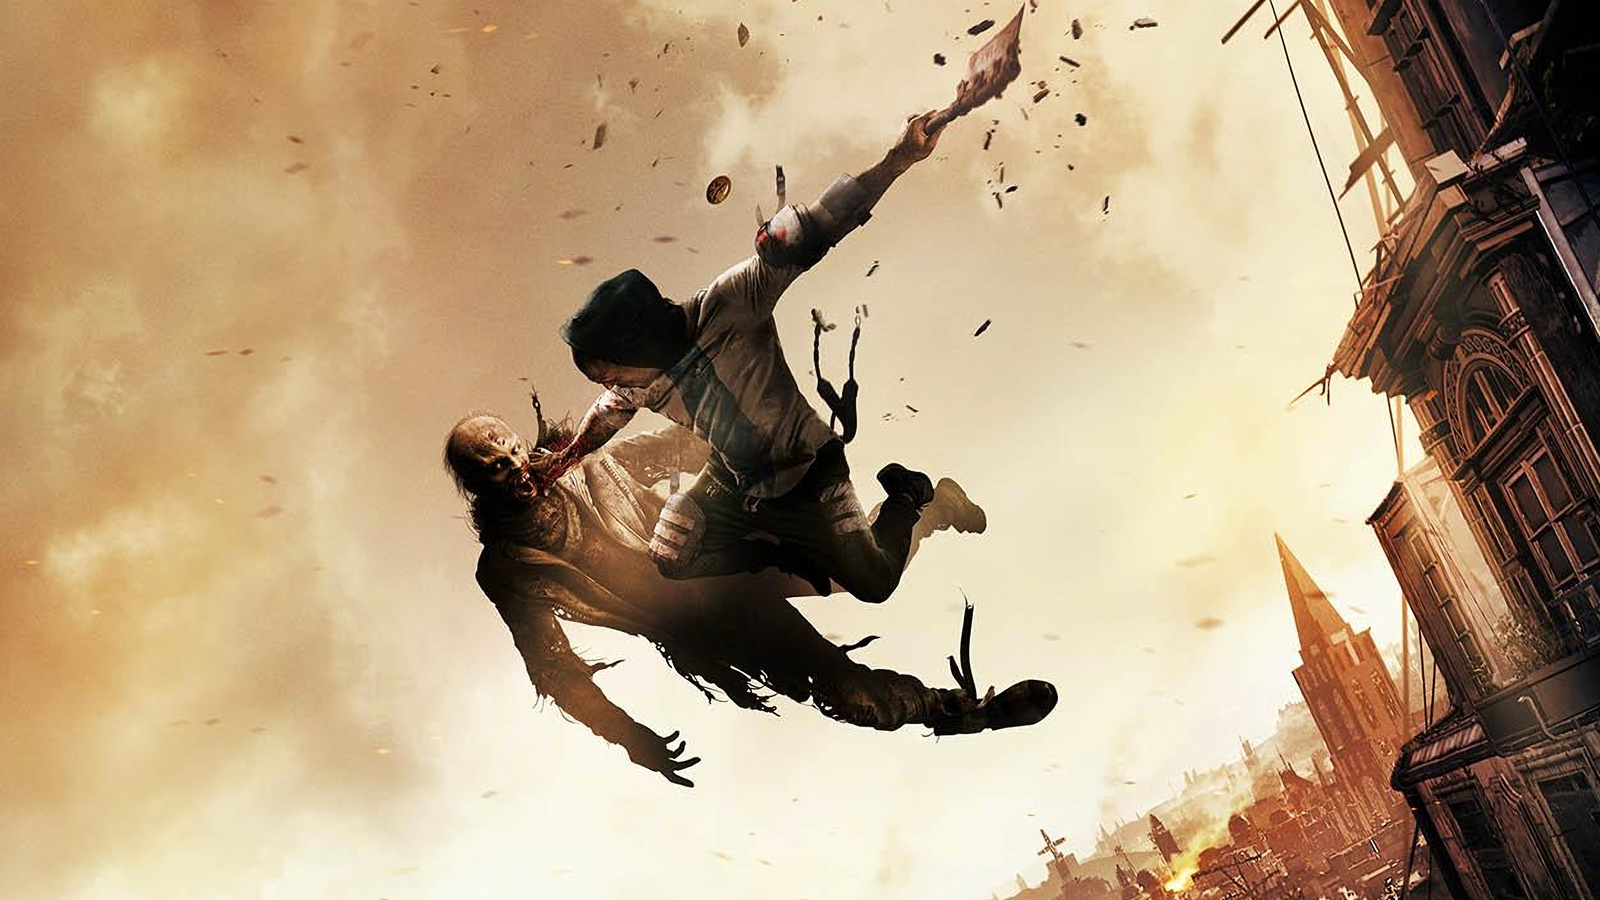 Dying light pc is a graphics juggernaut that powers past the consoles